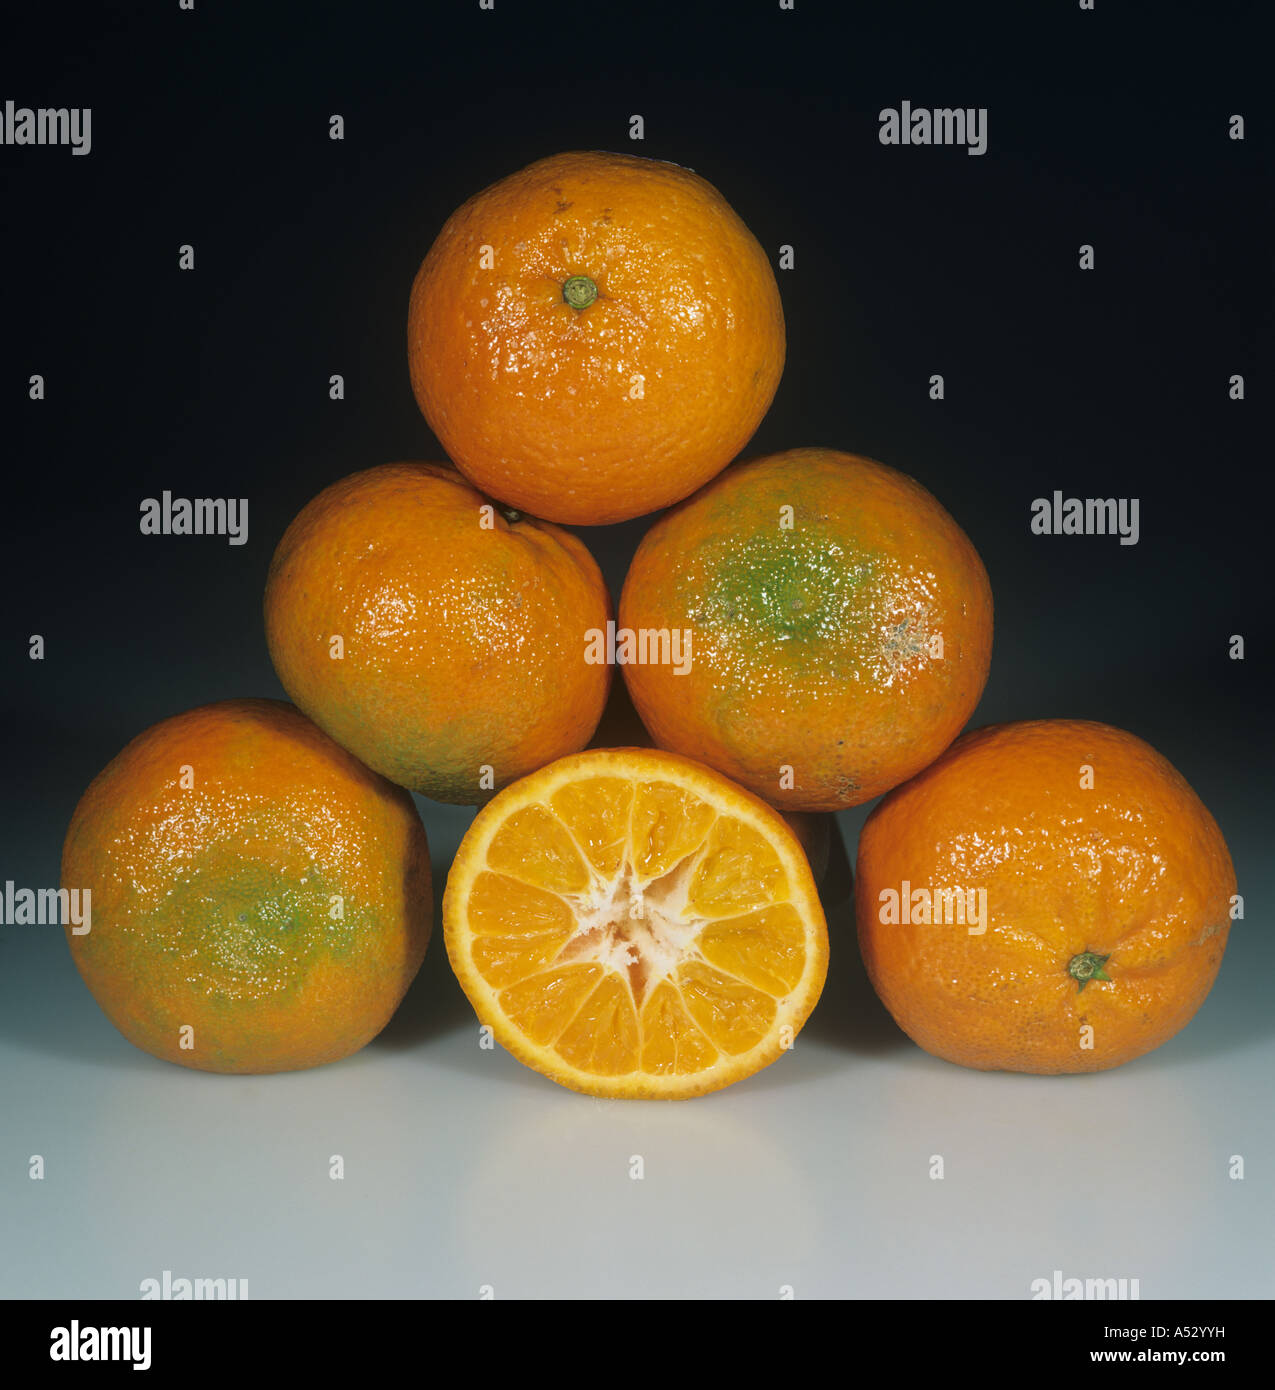 Whole sectioned clementine fruit variety Hernandina Stock Photo